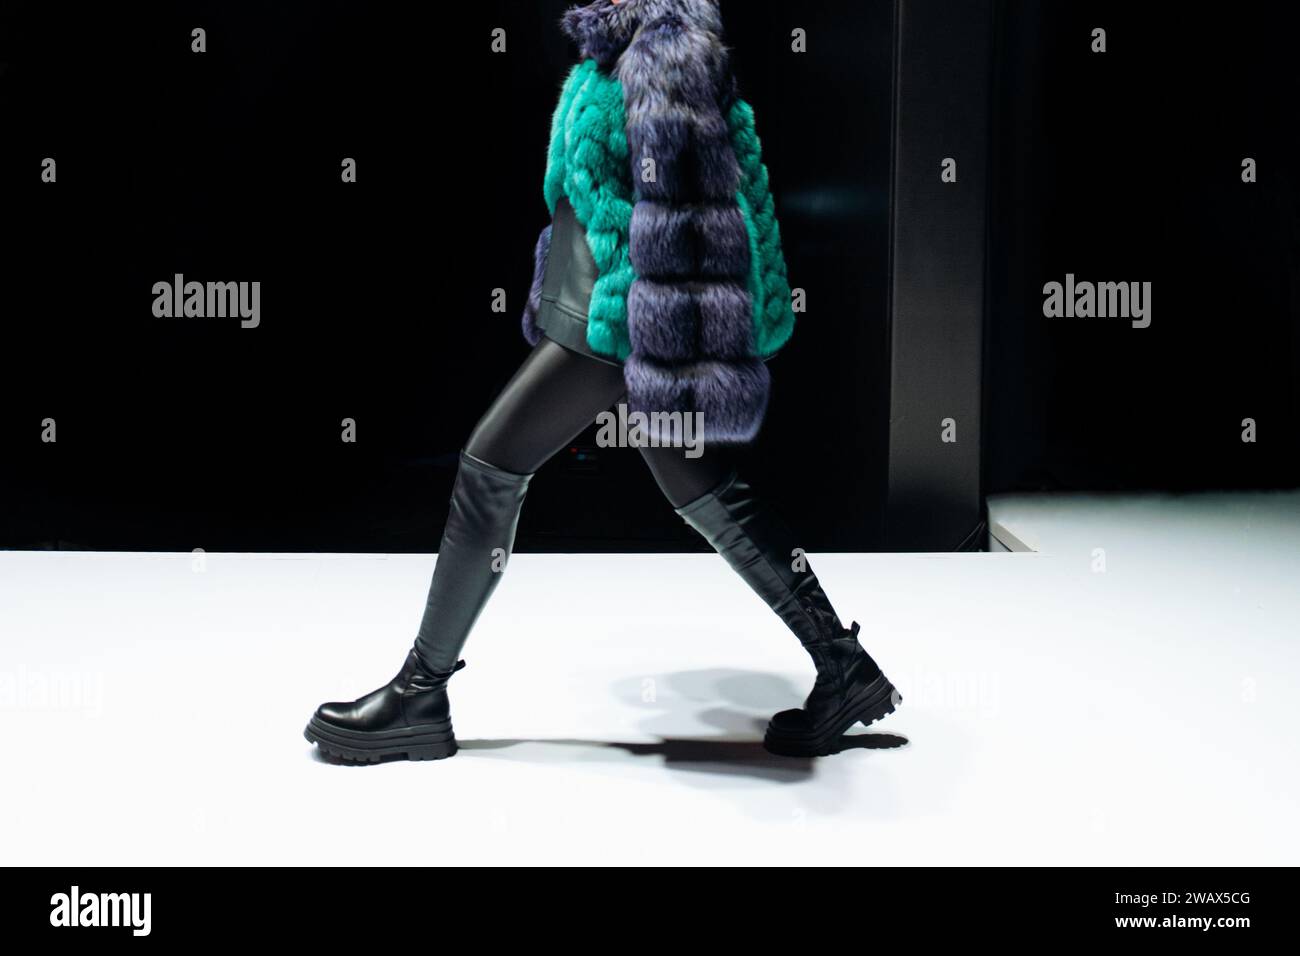 Female figure dressed in a fur coat and black leather boots walking on black background. Stock Photo